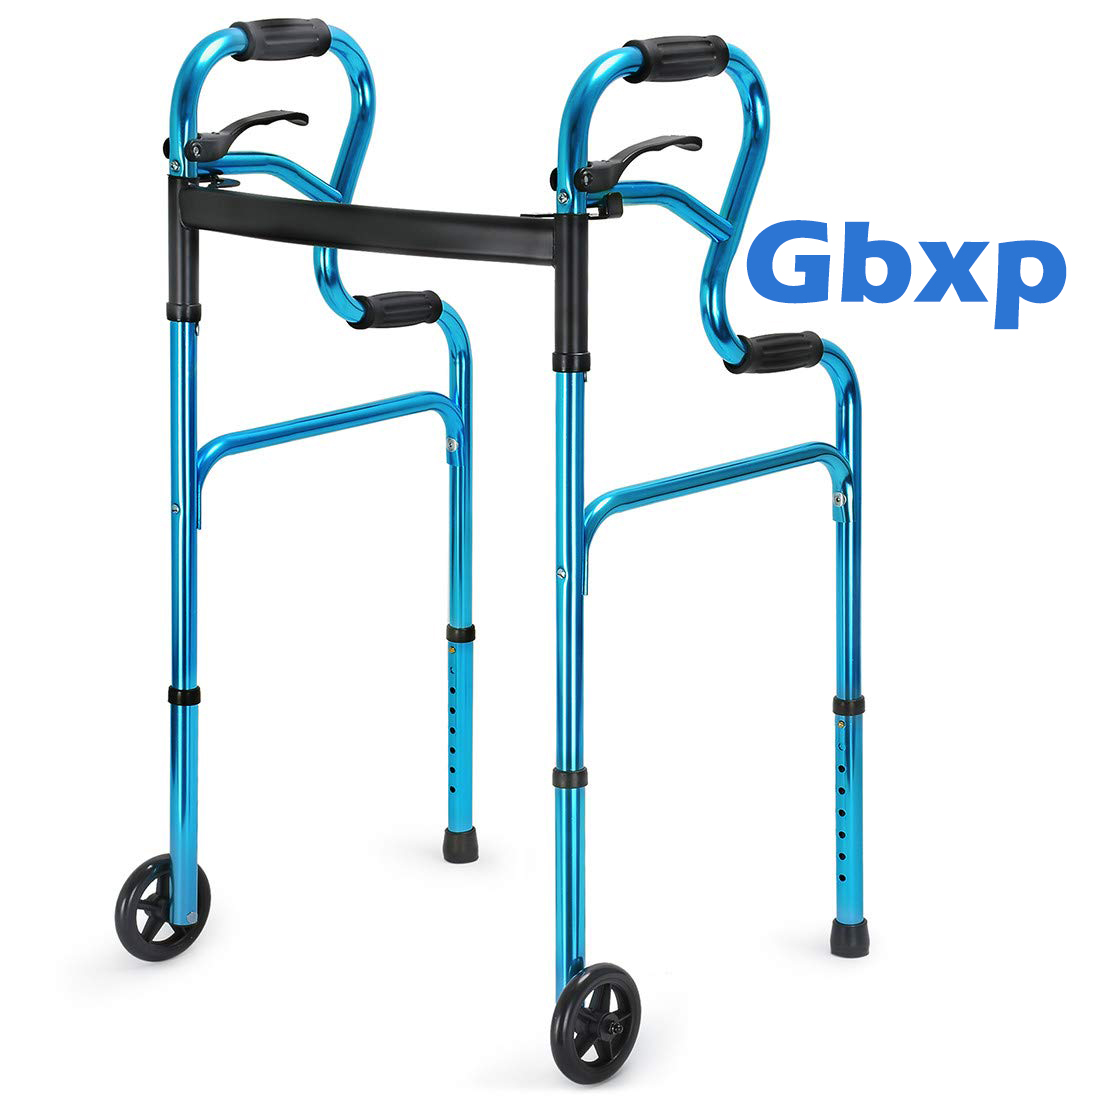 Gbxp Massage Products 3-in-1 Stand-Assist Folding Walker with 5″ Wheels Supports up to 350lbs, Walking Mobility Aid with Glide Ski, Can be Used as Toilet Safety Rail, Compact & Portable, Silver